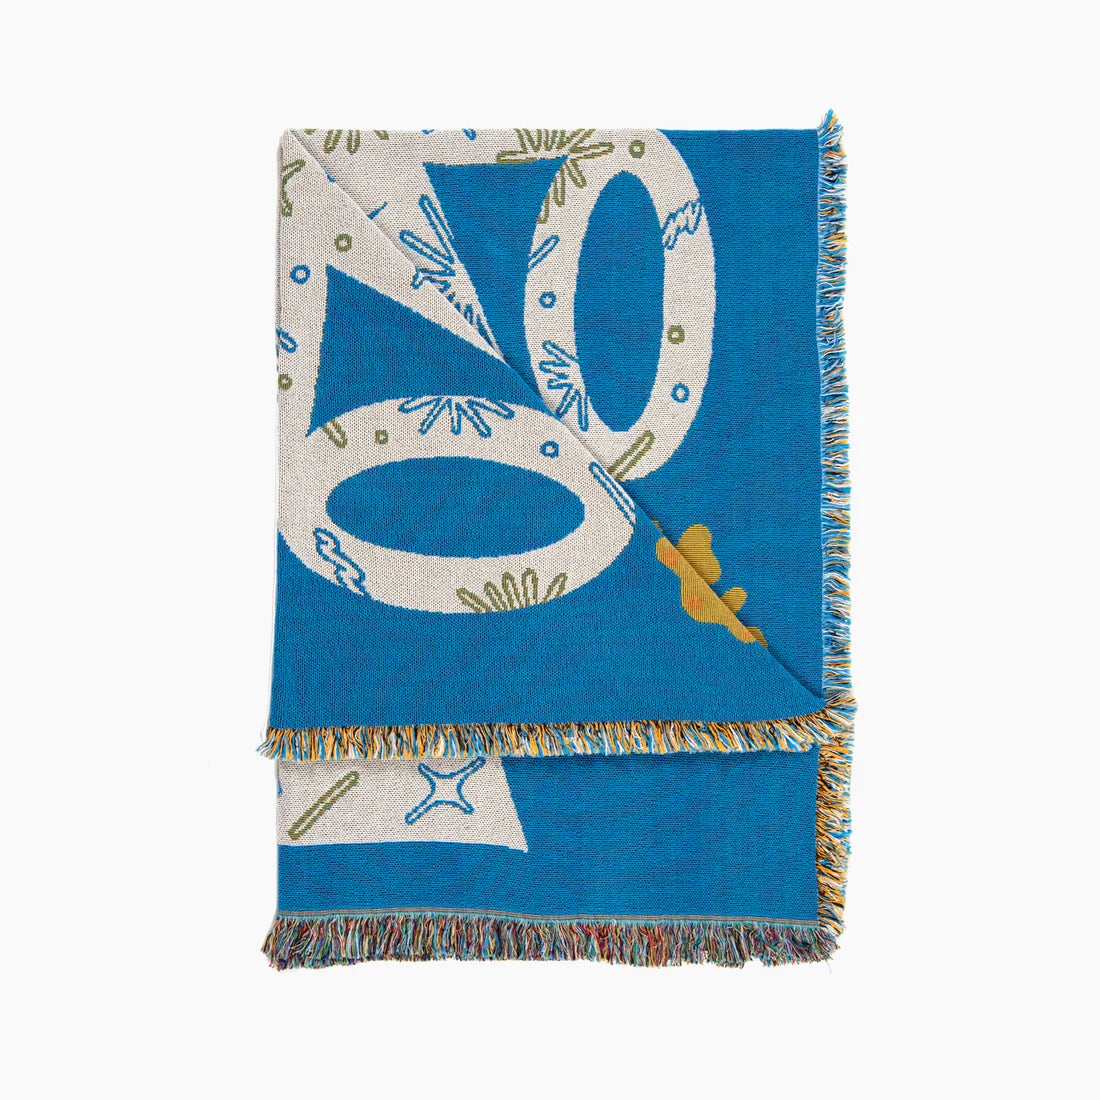 Blue, white and yellow tapestry blanket with a frayed edge detail